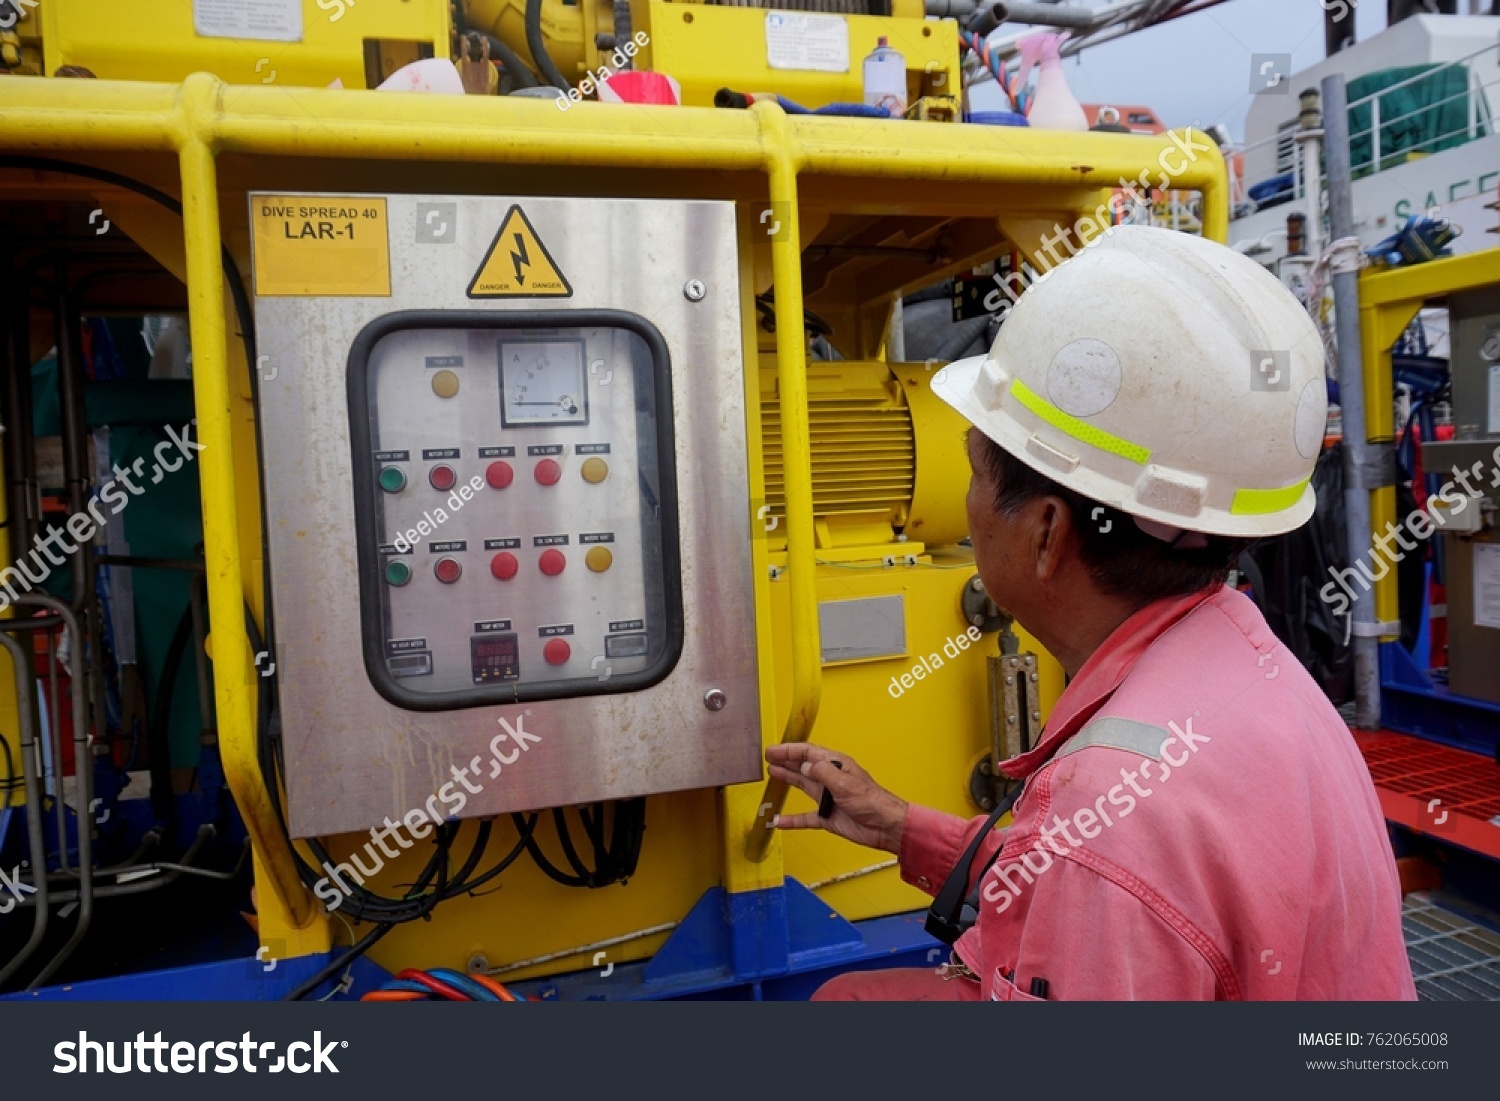 SARAWAK, MALAYSIA - MAY 30th, 2017: Unidentified offshore worker doing maintenance to the dive spread LAR-1. #762065008